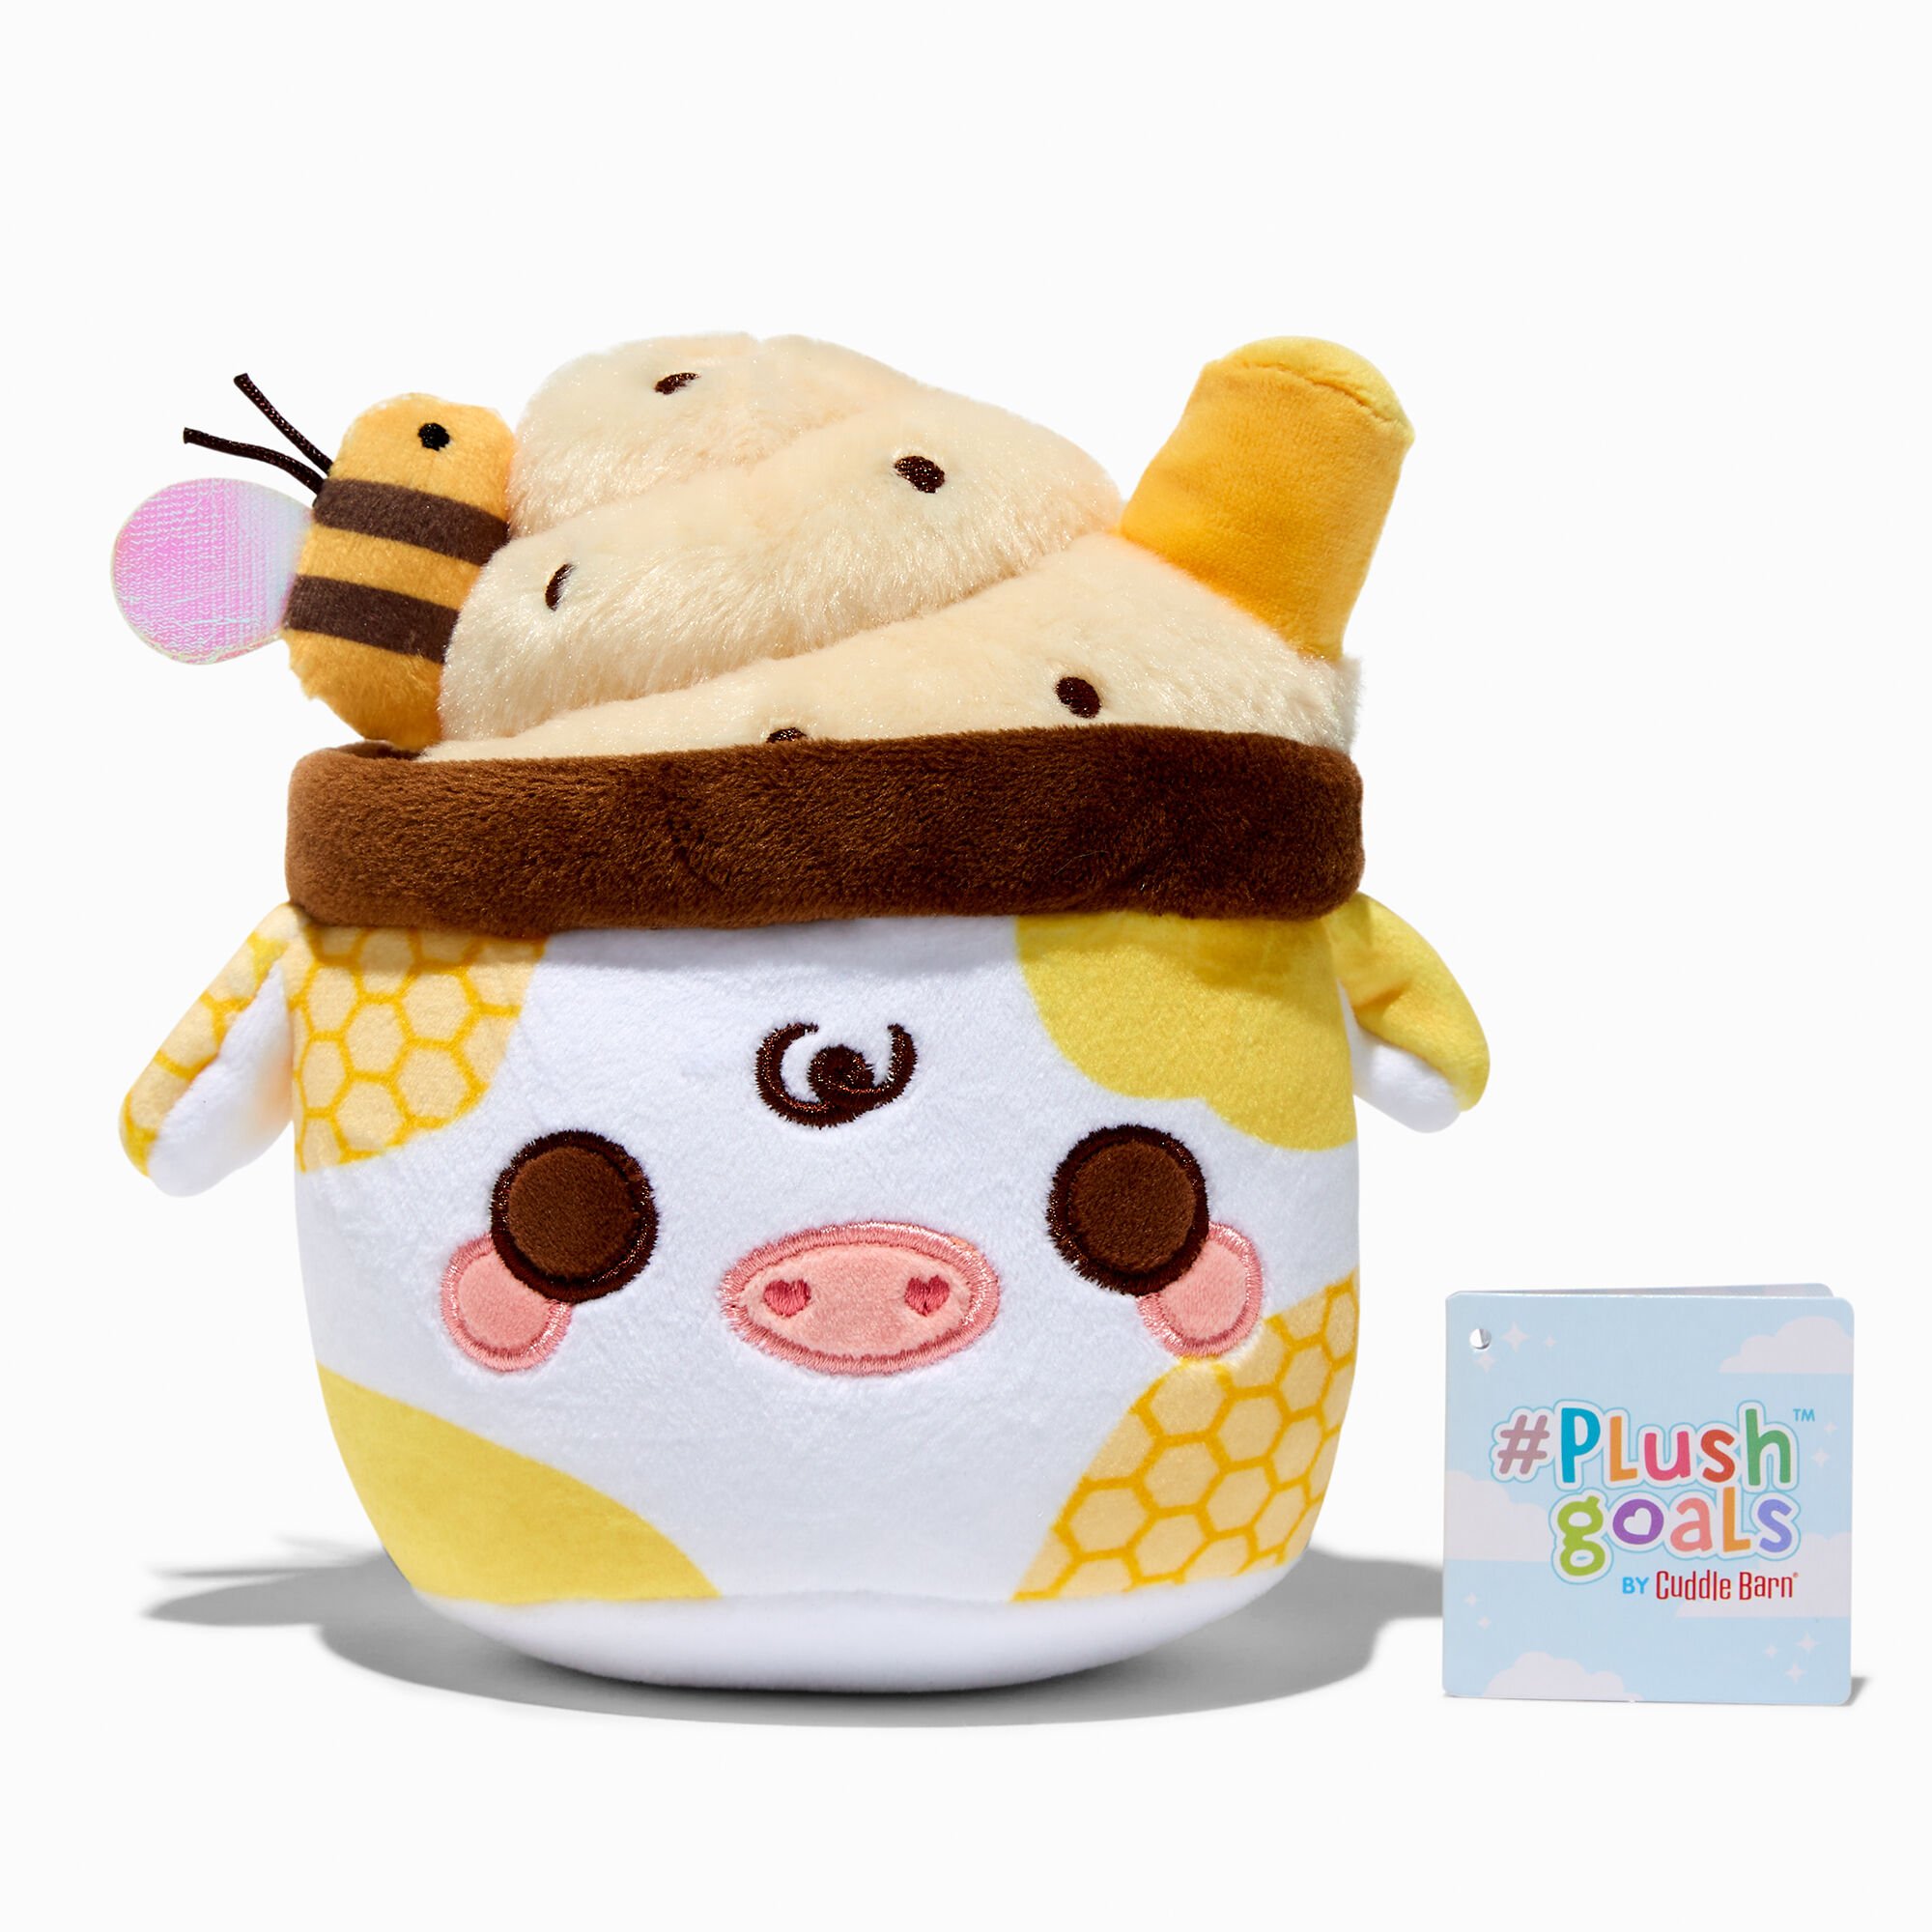 View Claires plush Goals By Cuddle Barn 6 Honeycomb Mooshake Plush Toy information